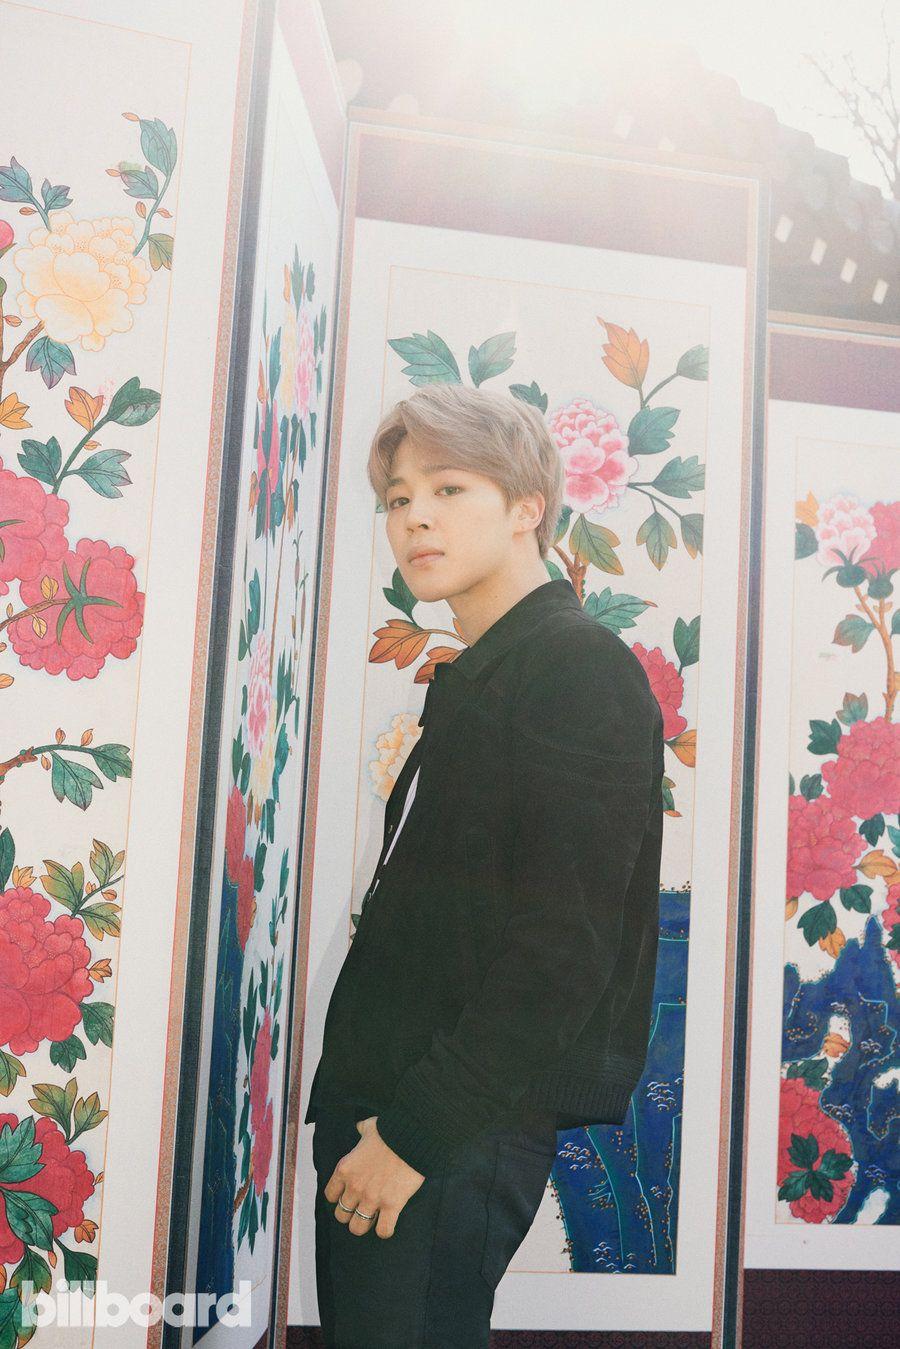 BTS Billboard Covers: All of the Pics From the Cover Shoot